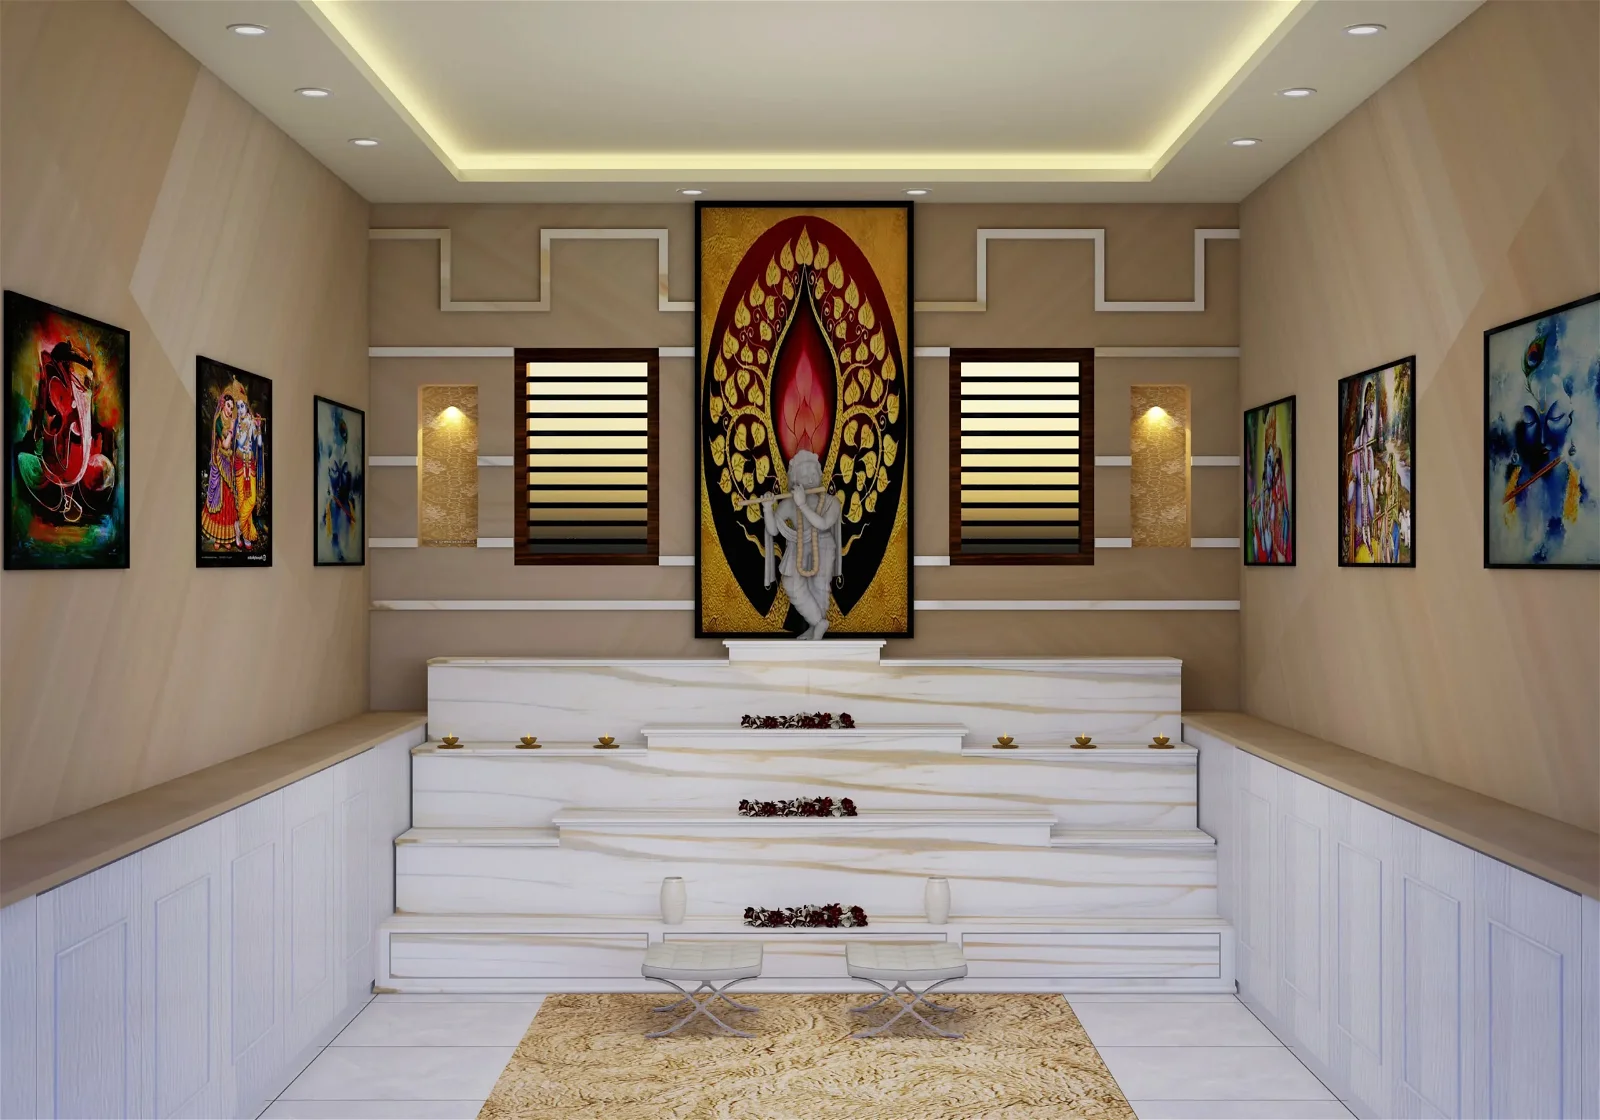 Pooja room designs with a 3D art on the walls